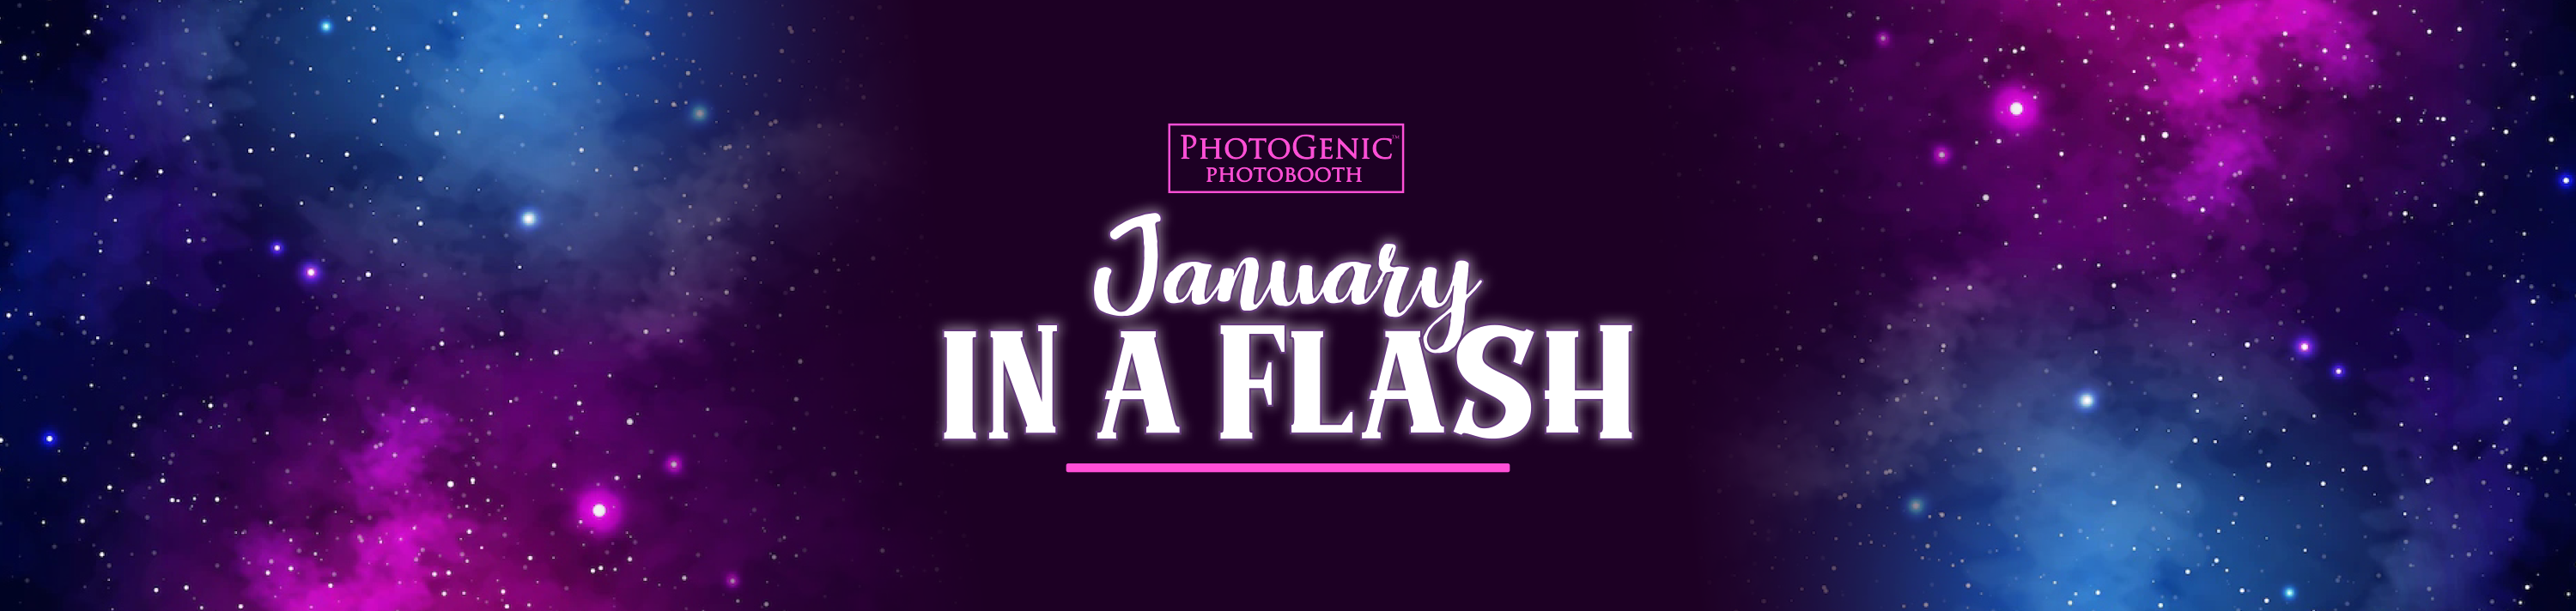 January in a flash